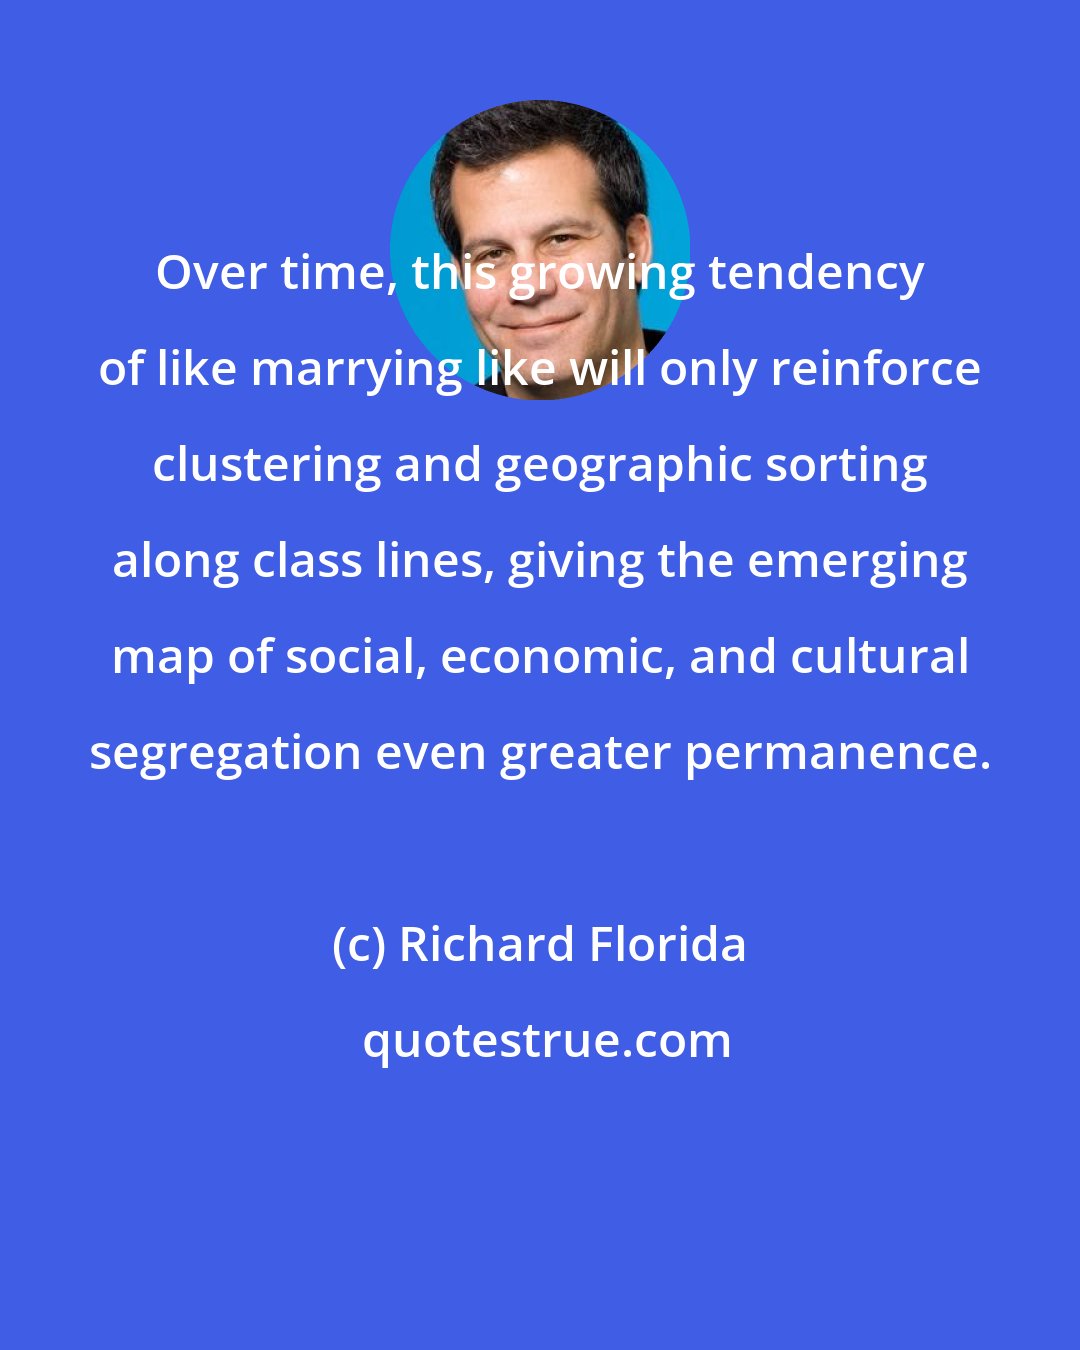 Richard Florida: Over time, this growing tendency of like marrying like will only reinforce clustering and geographic sorting along class lines, giving the emerging map of social, economic, and cultural segregation even greater permanence.